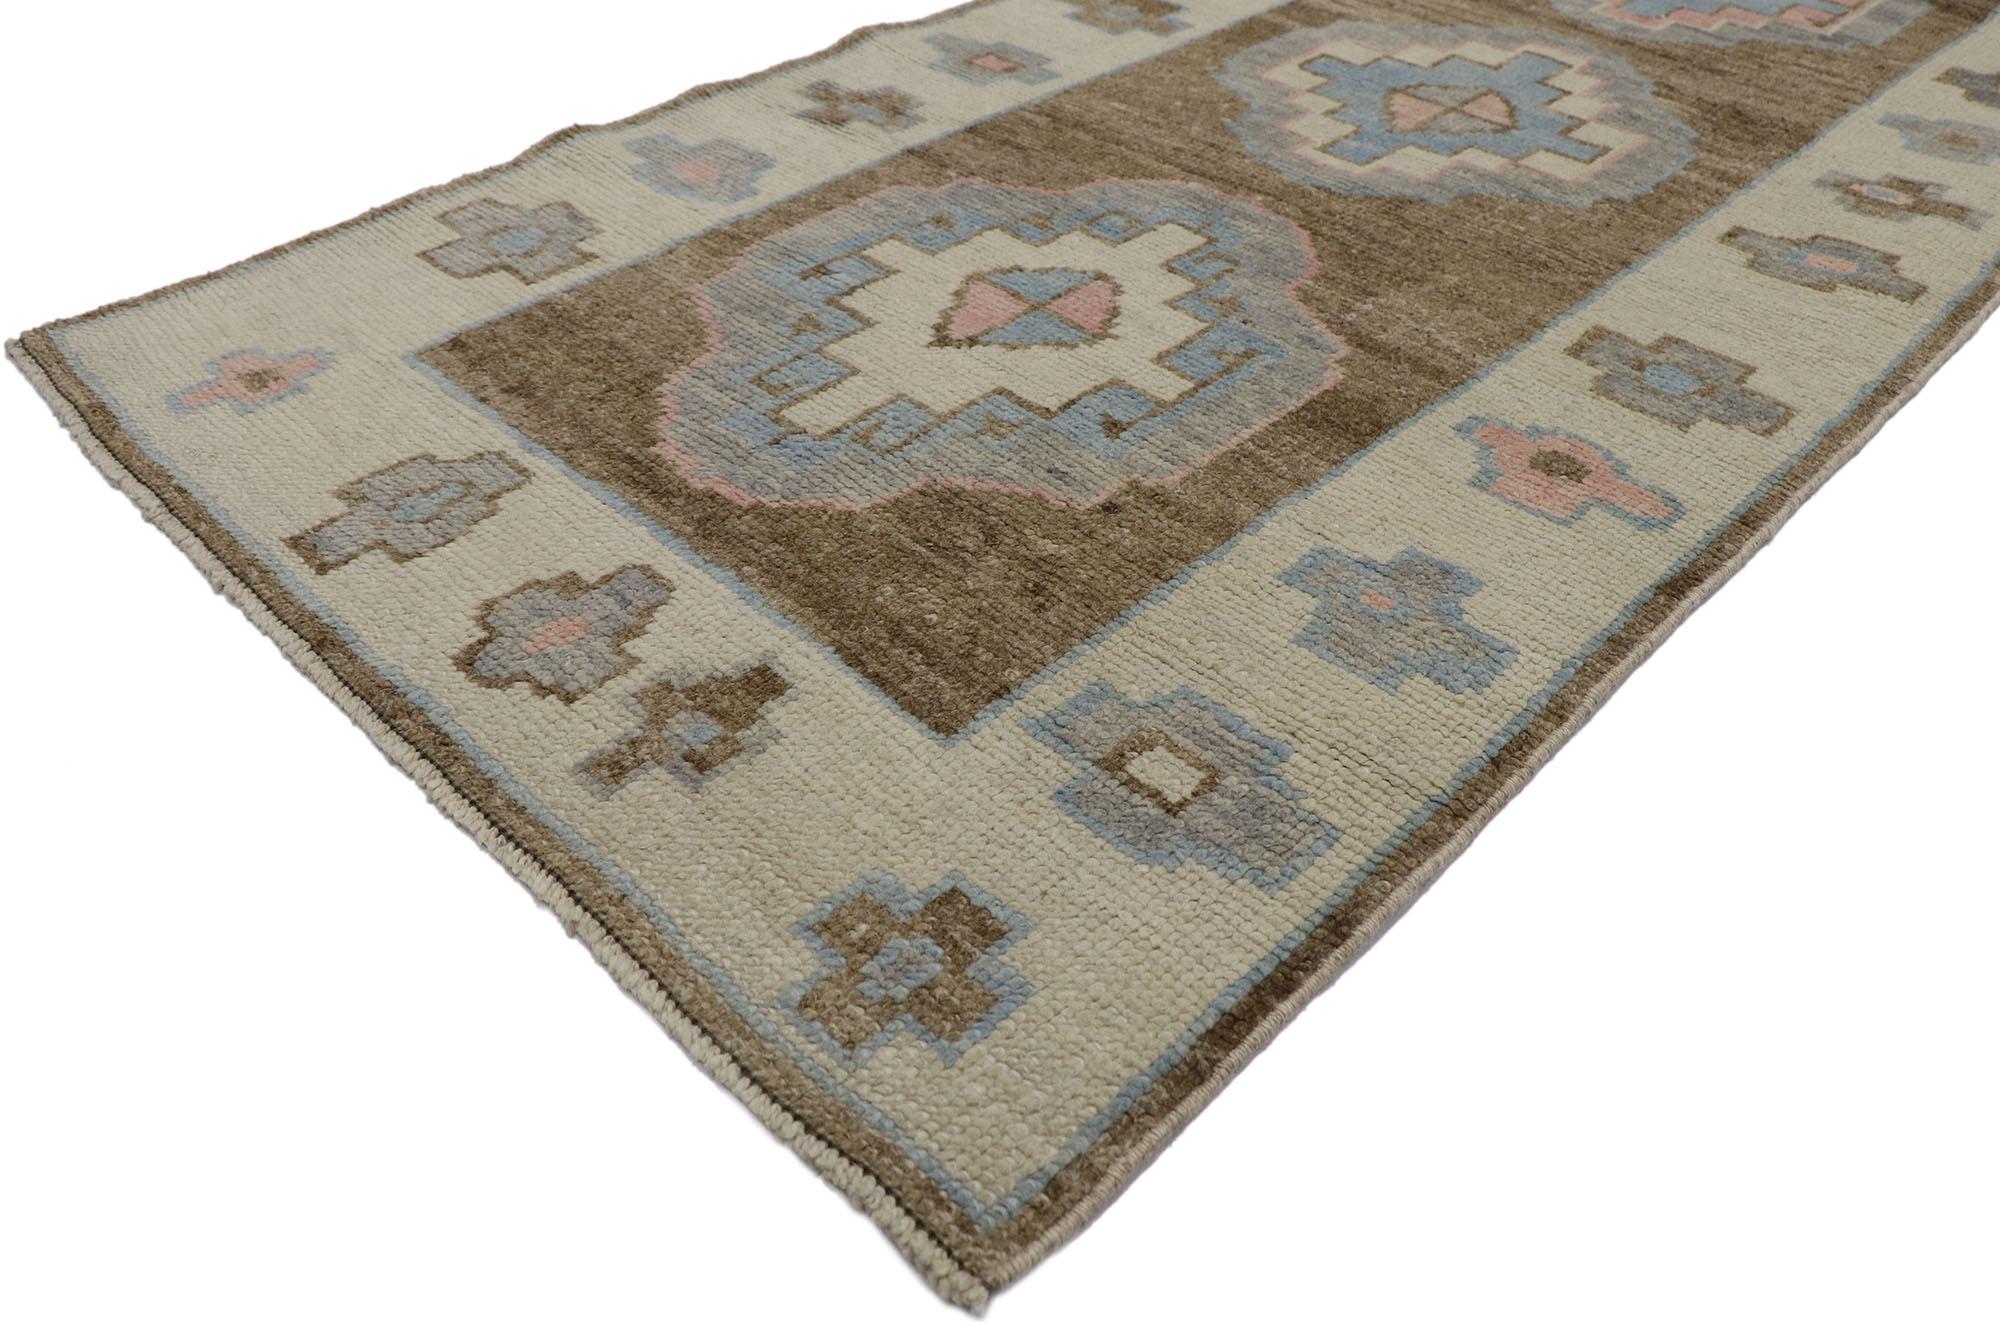 53587-53590 Matching Pair of New Contemporary Turkish Oushak Runners with Modern Style 03'00 x 20'05. This hand-knotted wool contemporary Turkish Oushak runner features an all-over geometric pattern spread across an abrashed camel and brown striated